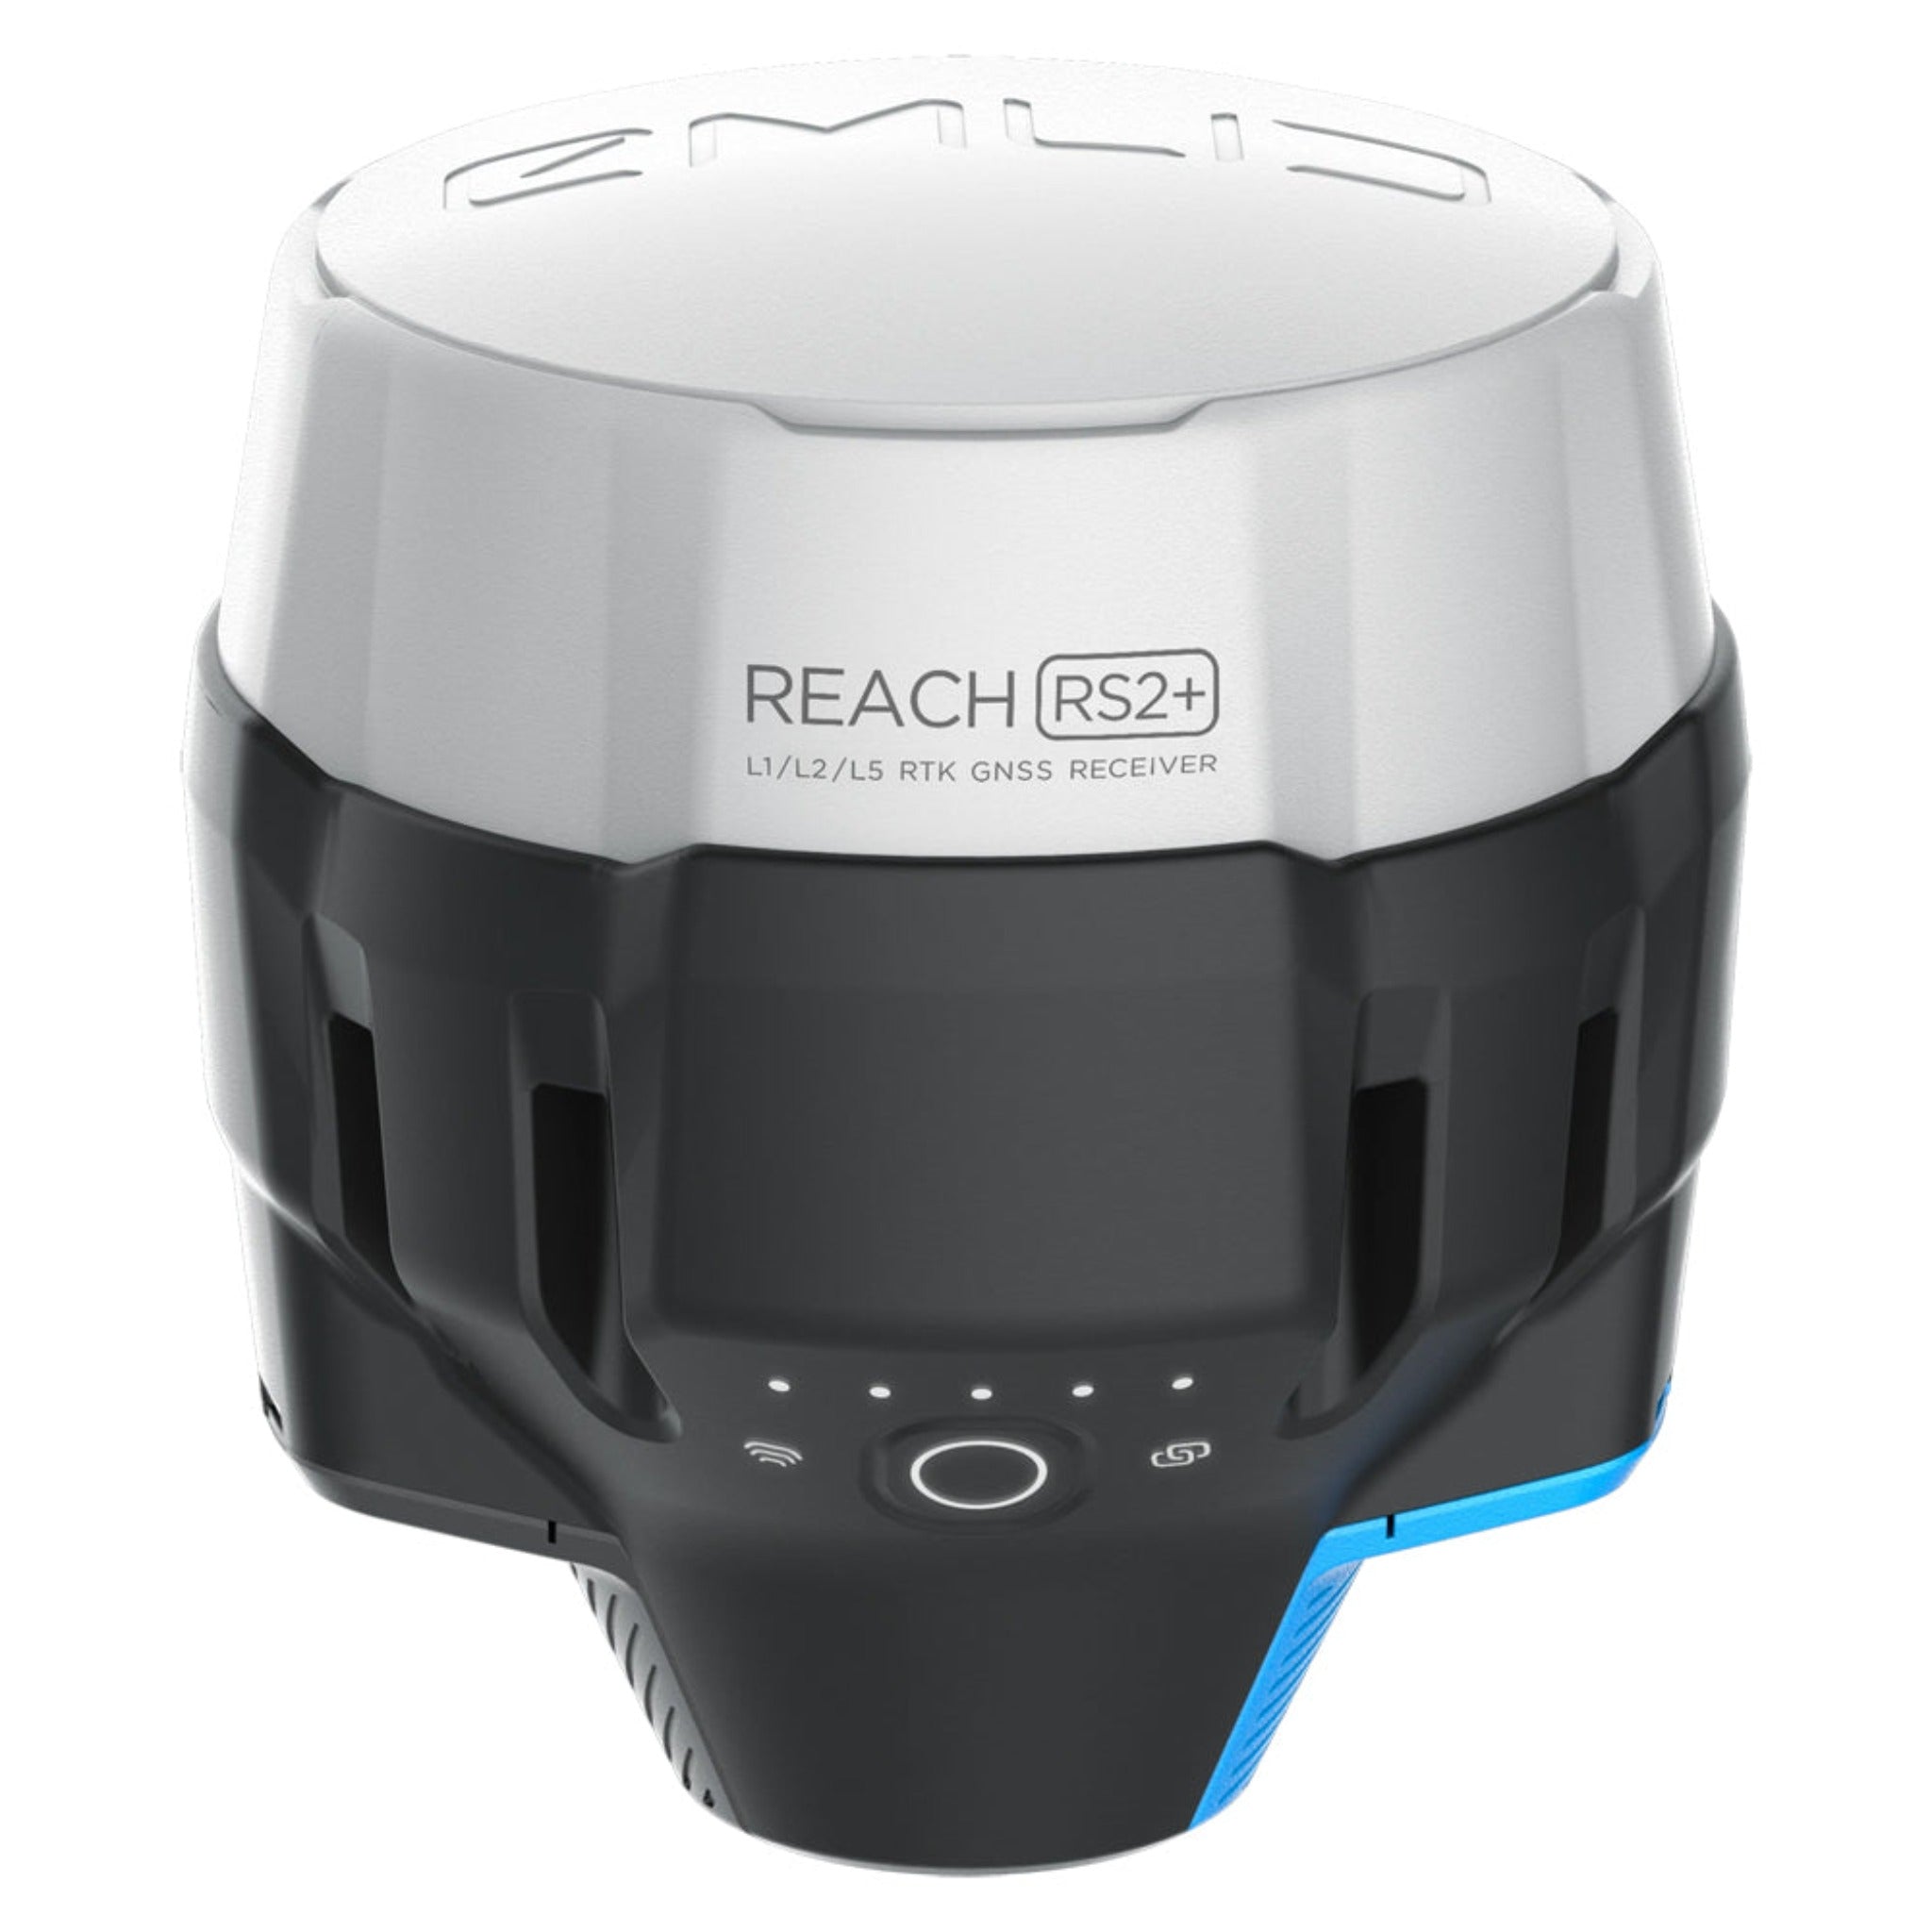 Emlid Reach RS2+ Multi-band RTK GNSS Receiver